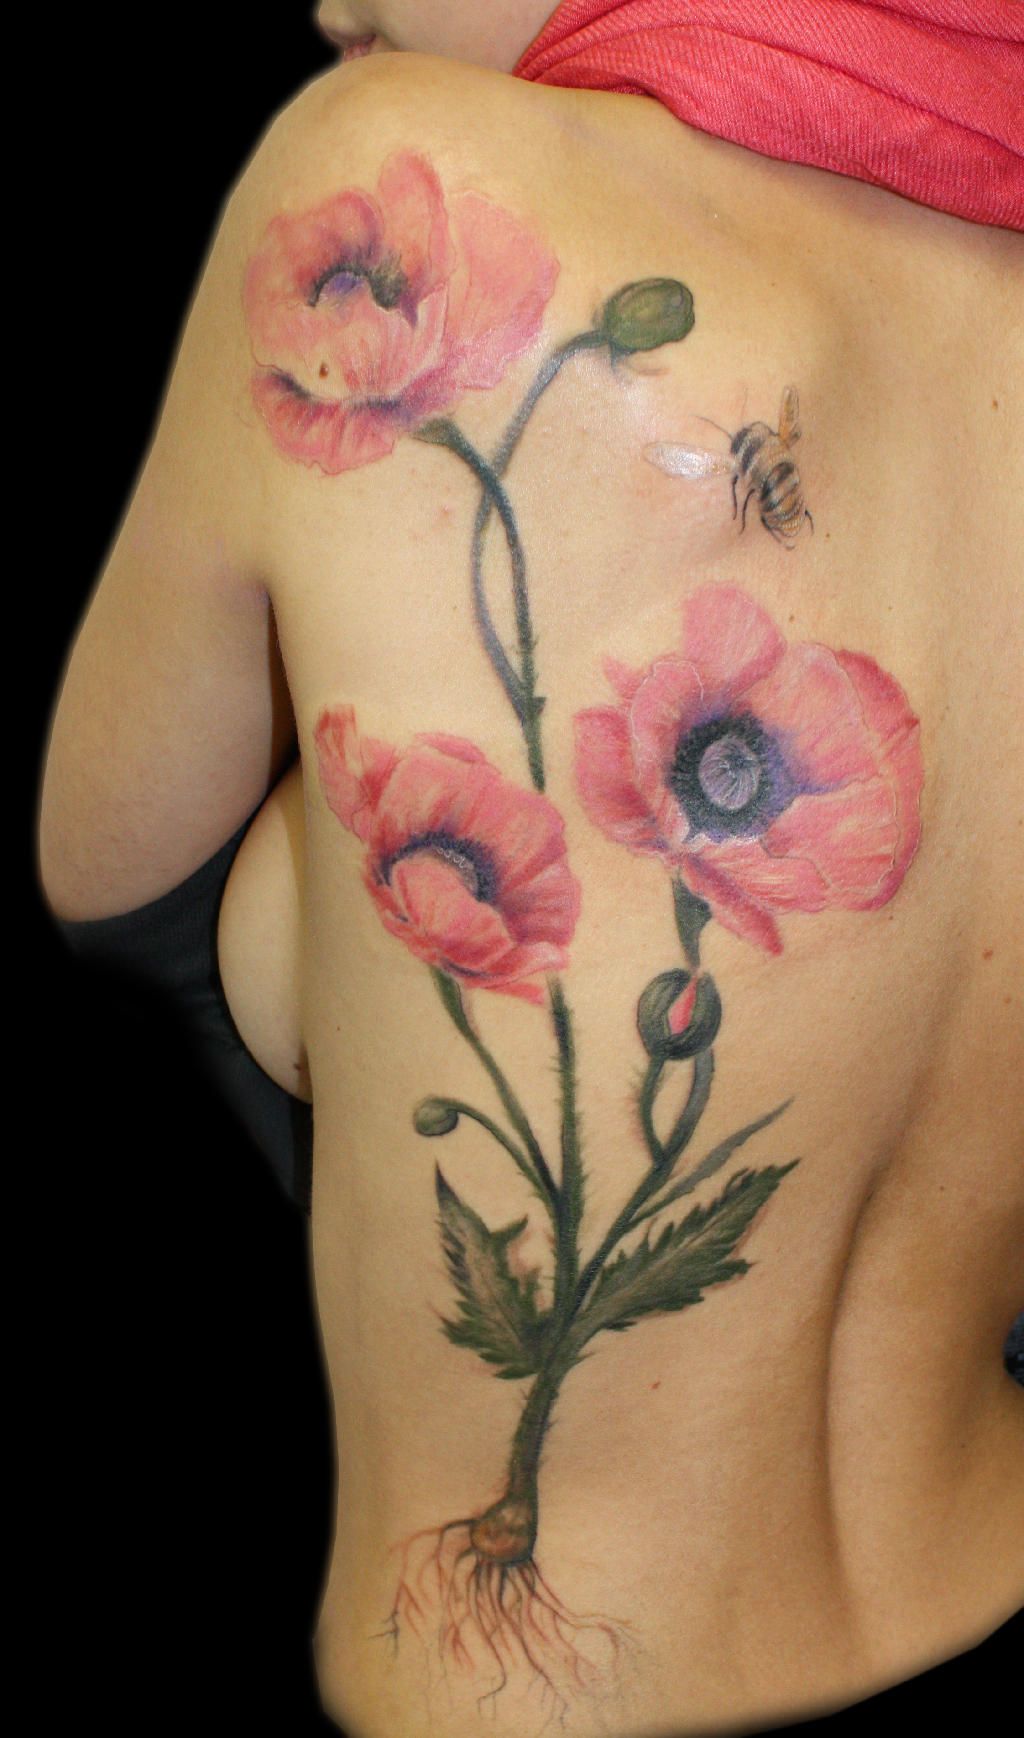 Poppy Tattoo Meaning: Exploring the Rich Meanings Infused into Body Ink